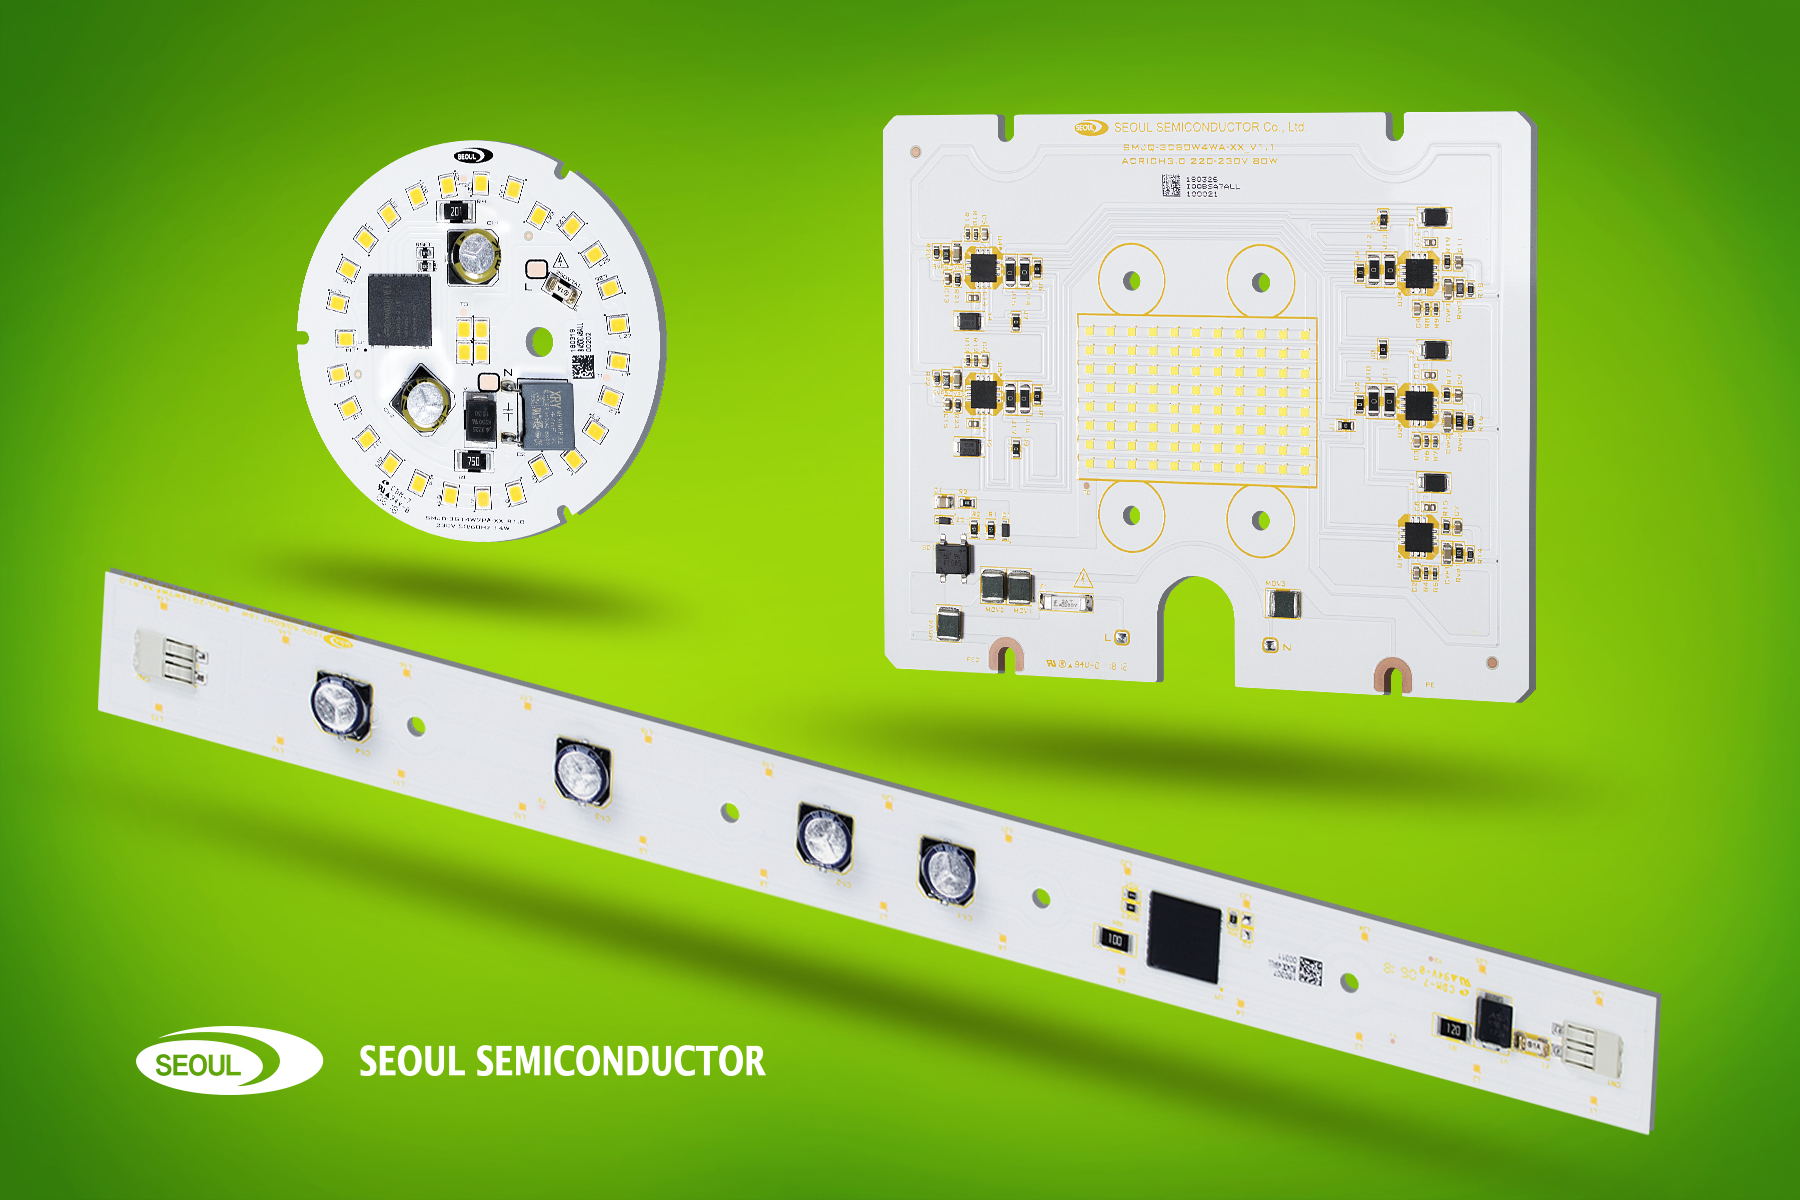 AC LED Modules Offered in Designs From 200 to 10,000 Lumens